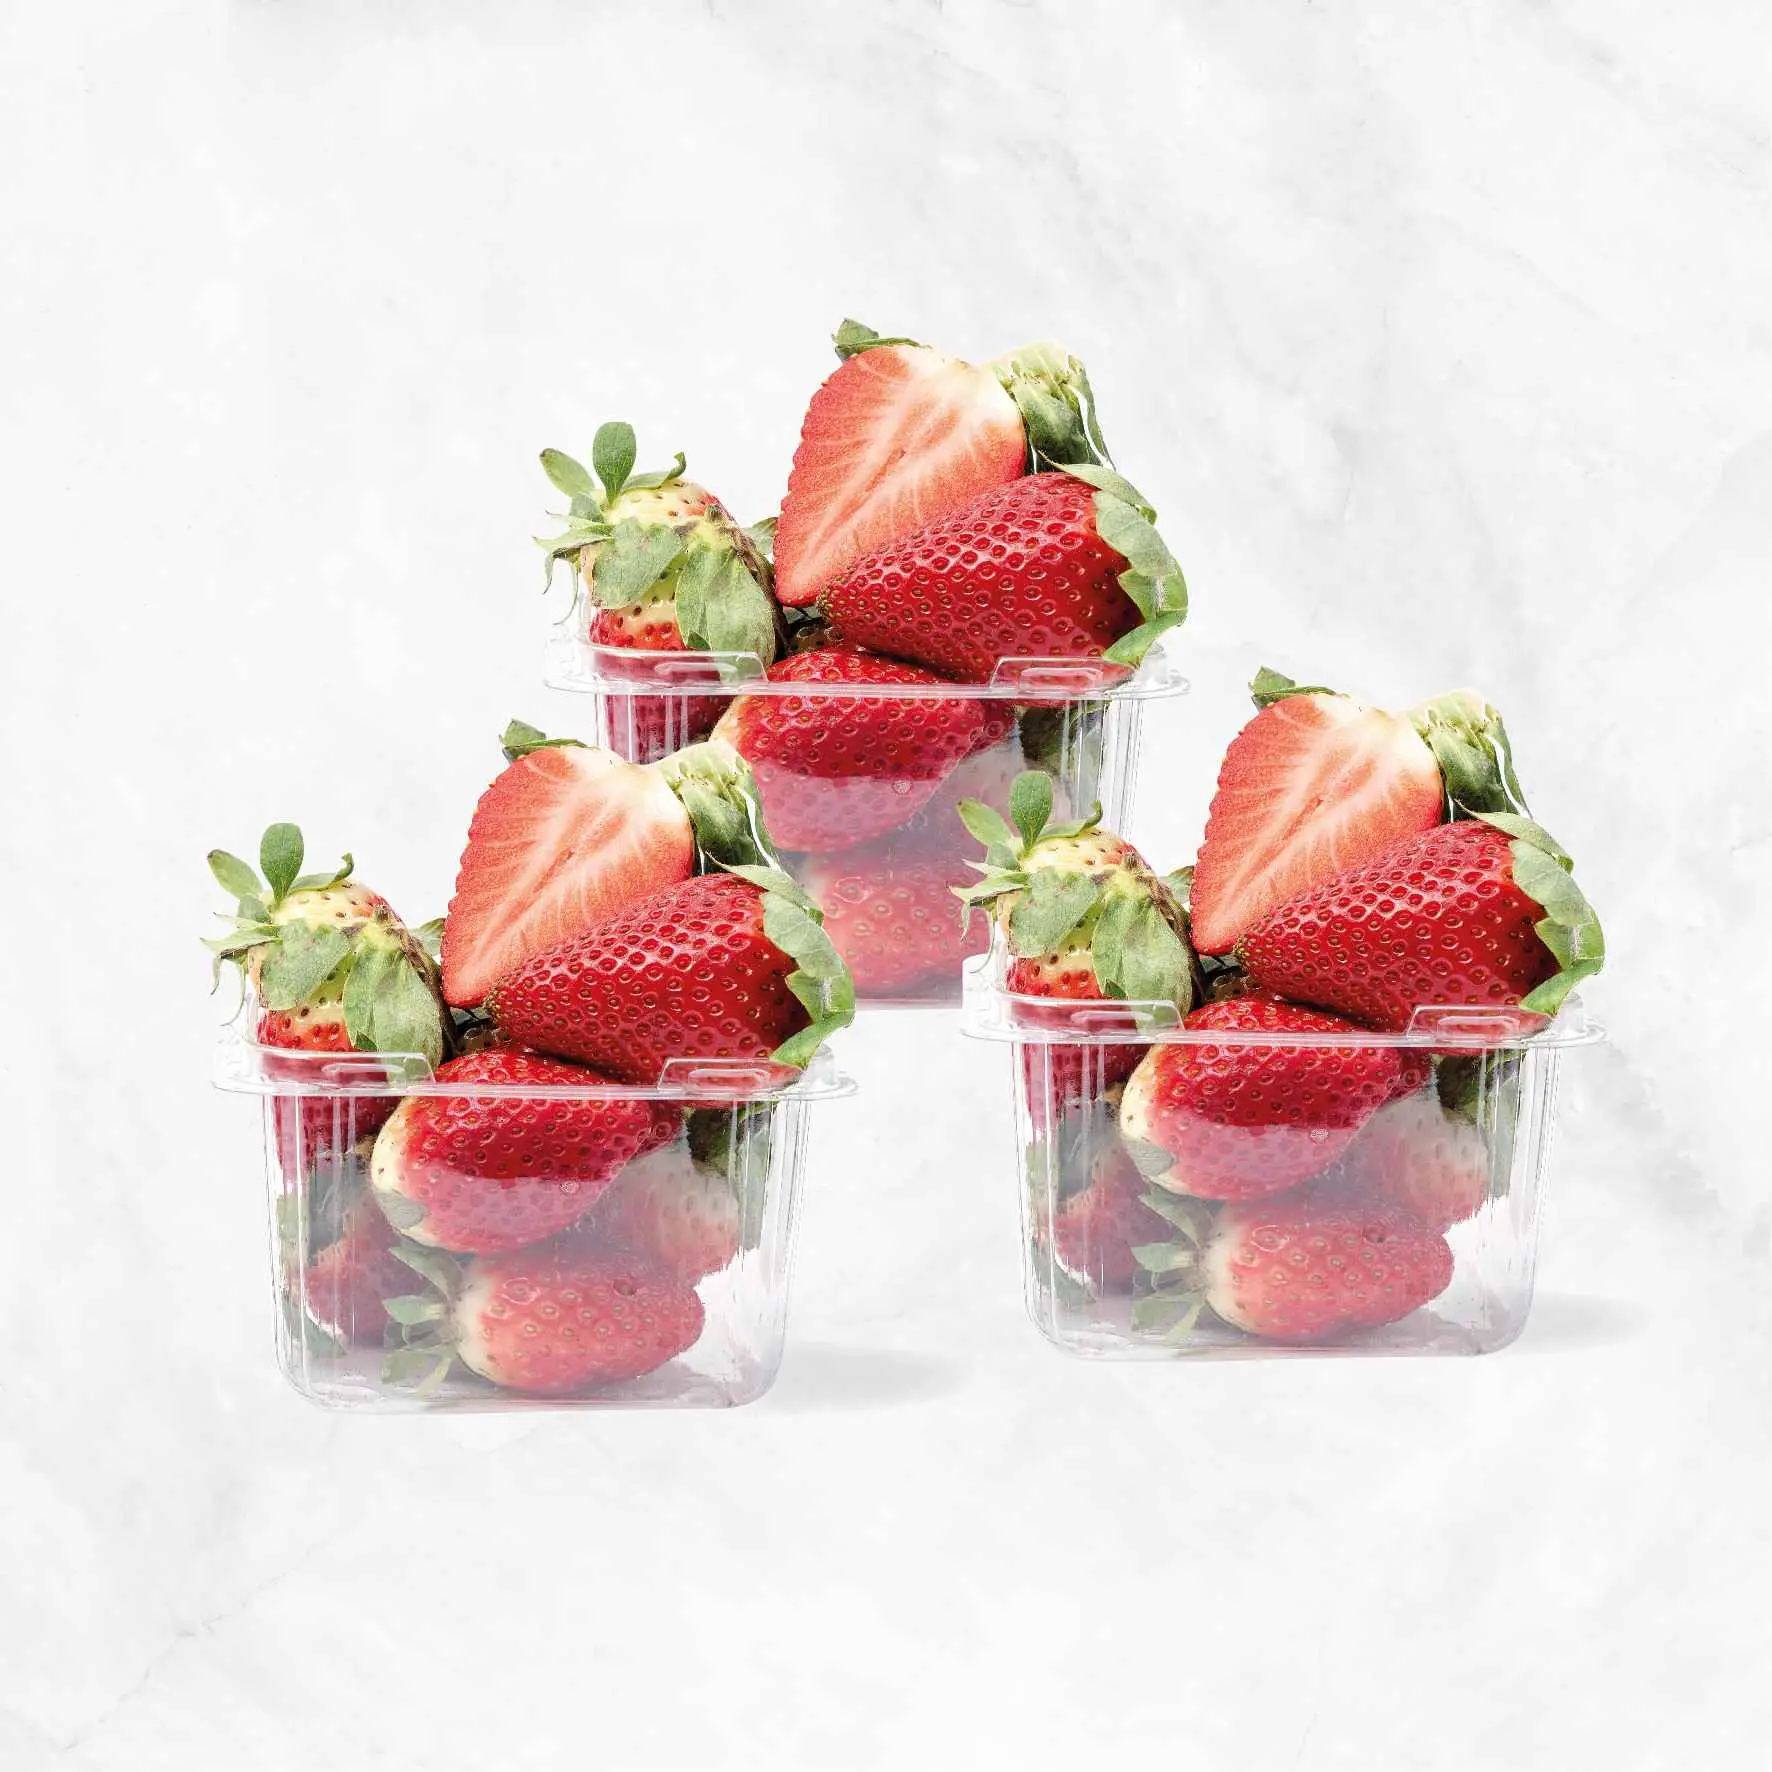 Organic Strawberries - 3 Pack Delivery